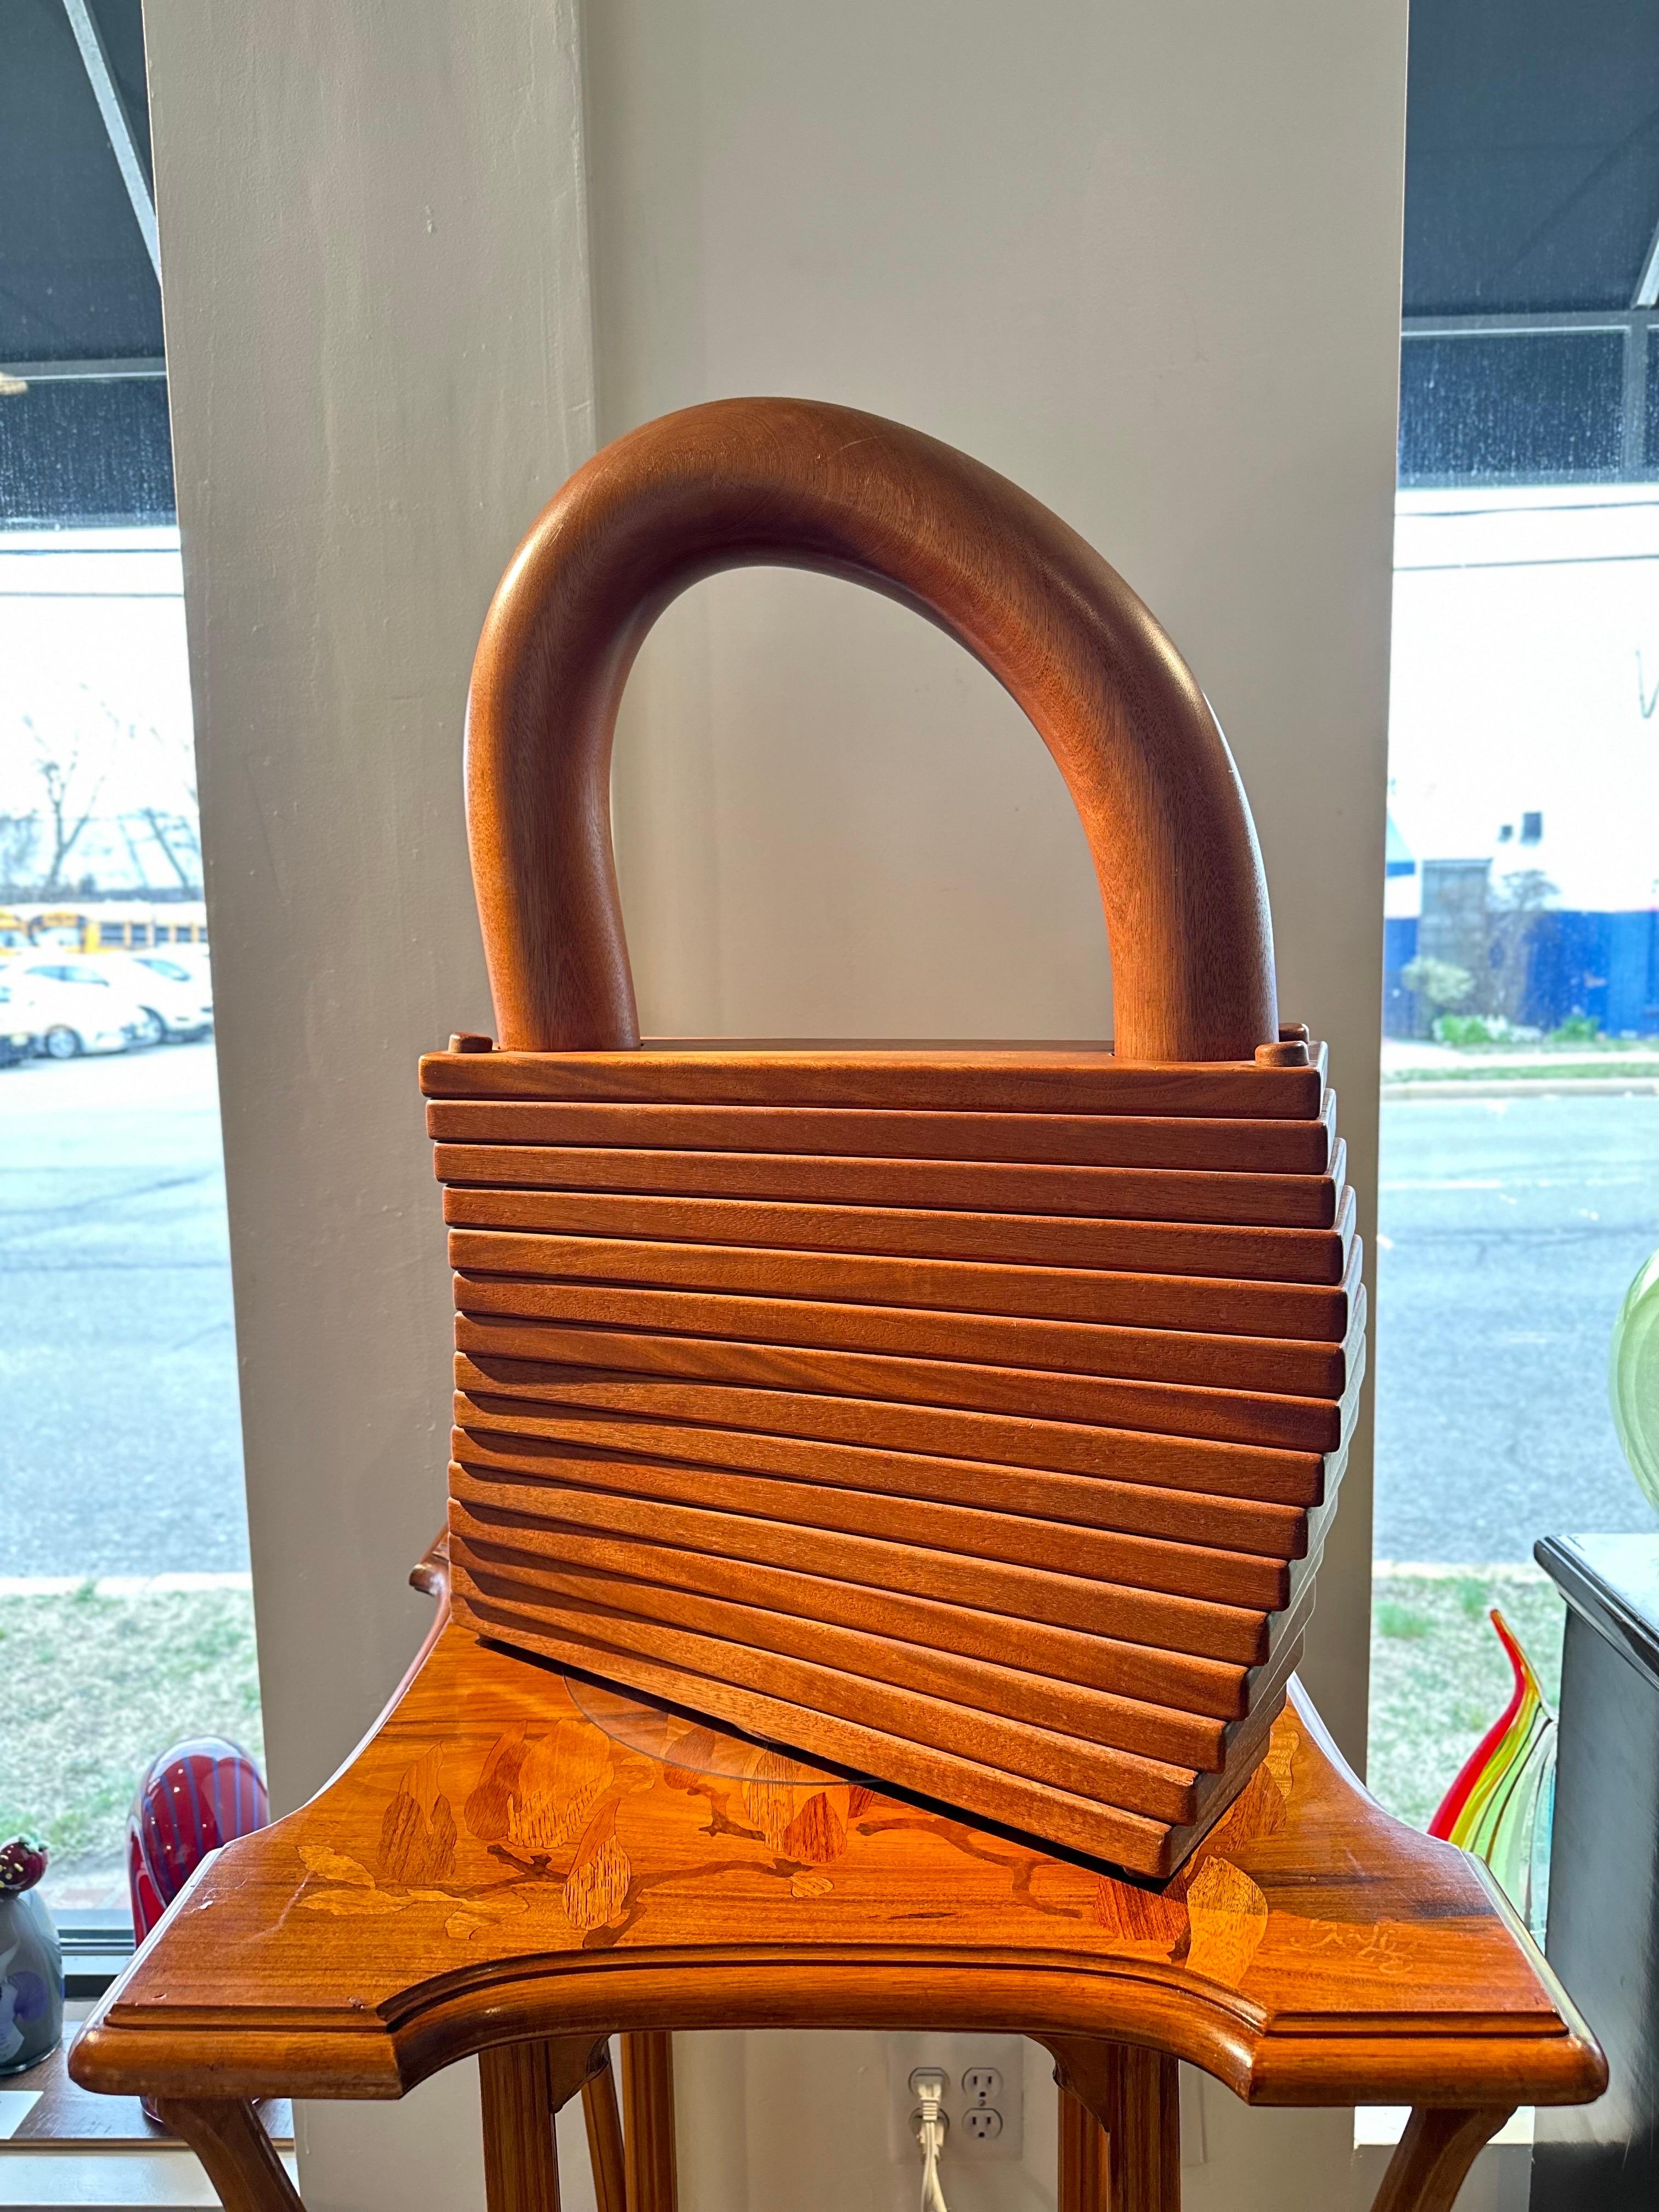 A Monumental American Mid Century Modern Studio Craft carved solid wood sculpture of a pad lock. The sculpture is large in scale. The pad lock is very detailed in its look and appearence and is highly detailed down to the key hole on the underside.